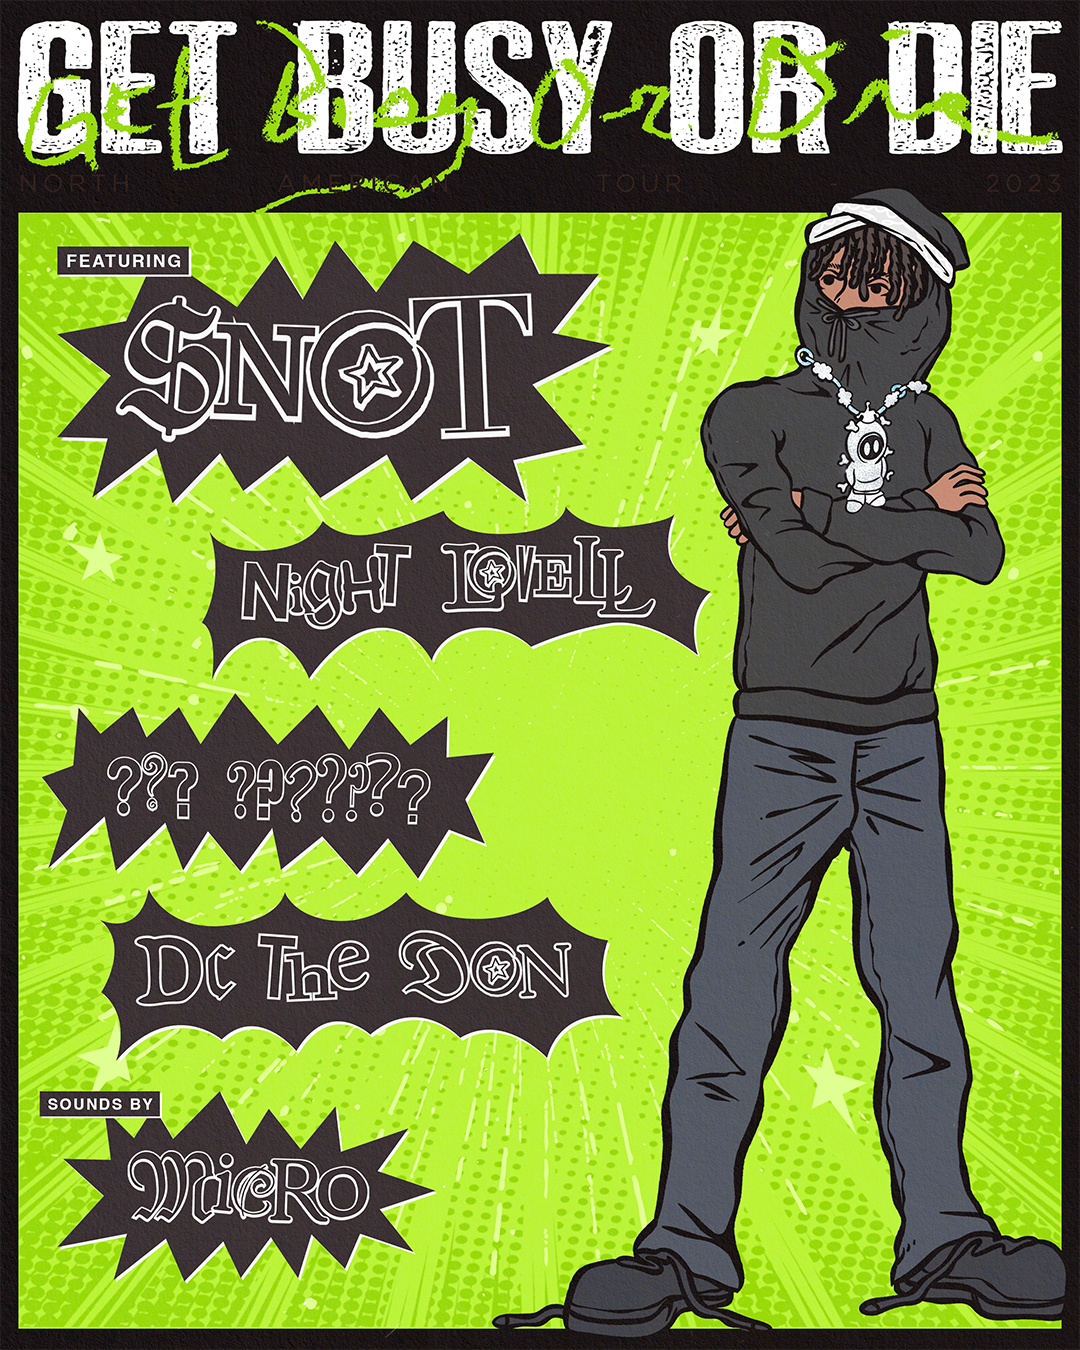 https://snot.xyz/images/tour/get_busy_or_die_tour_poster2.png